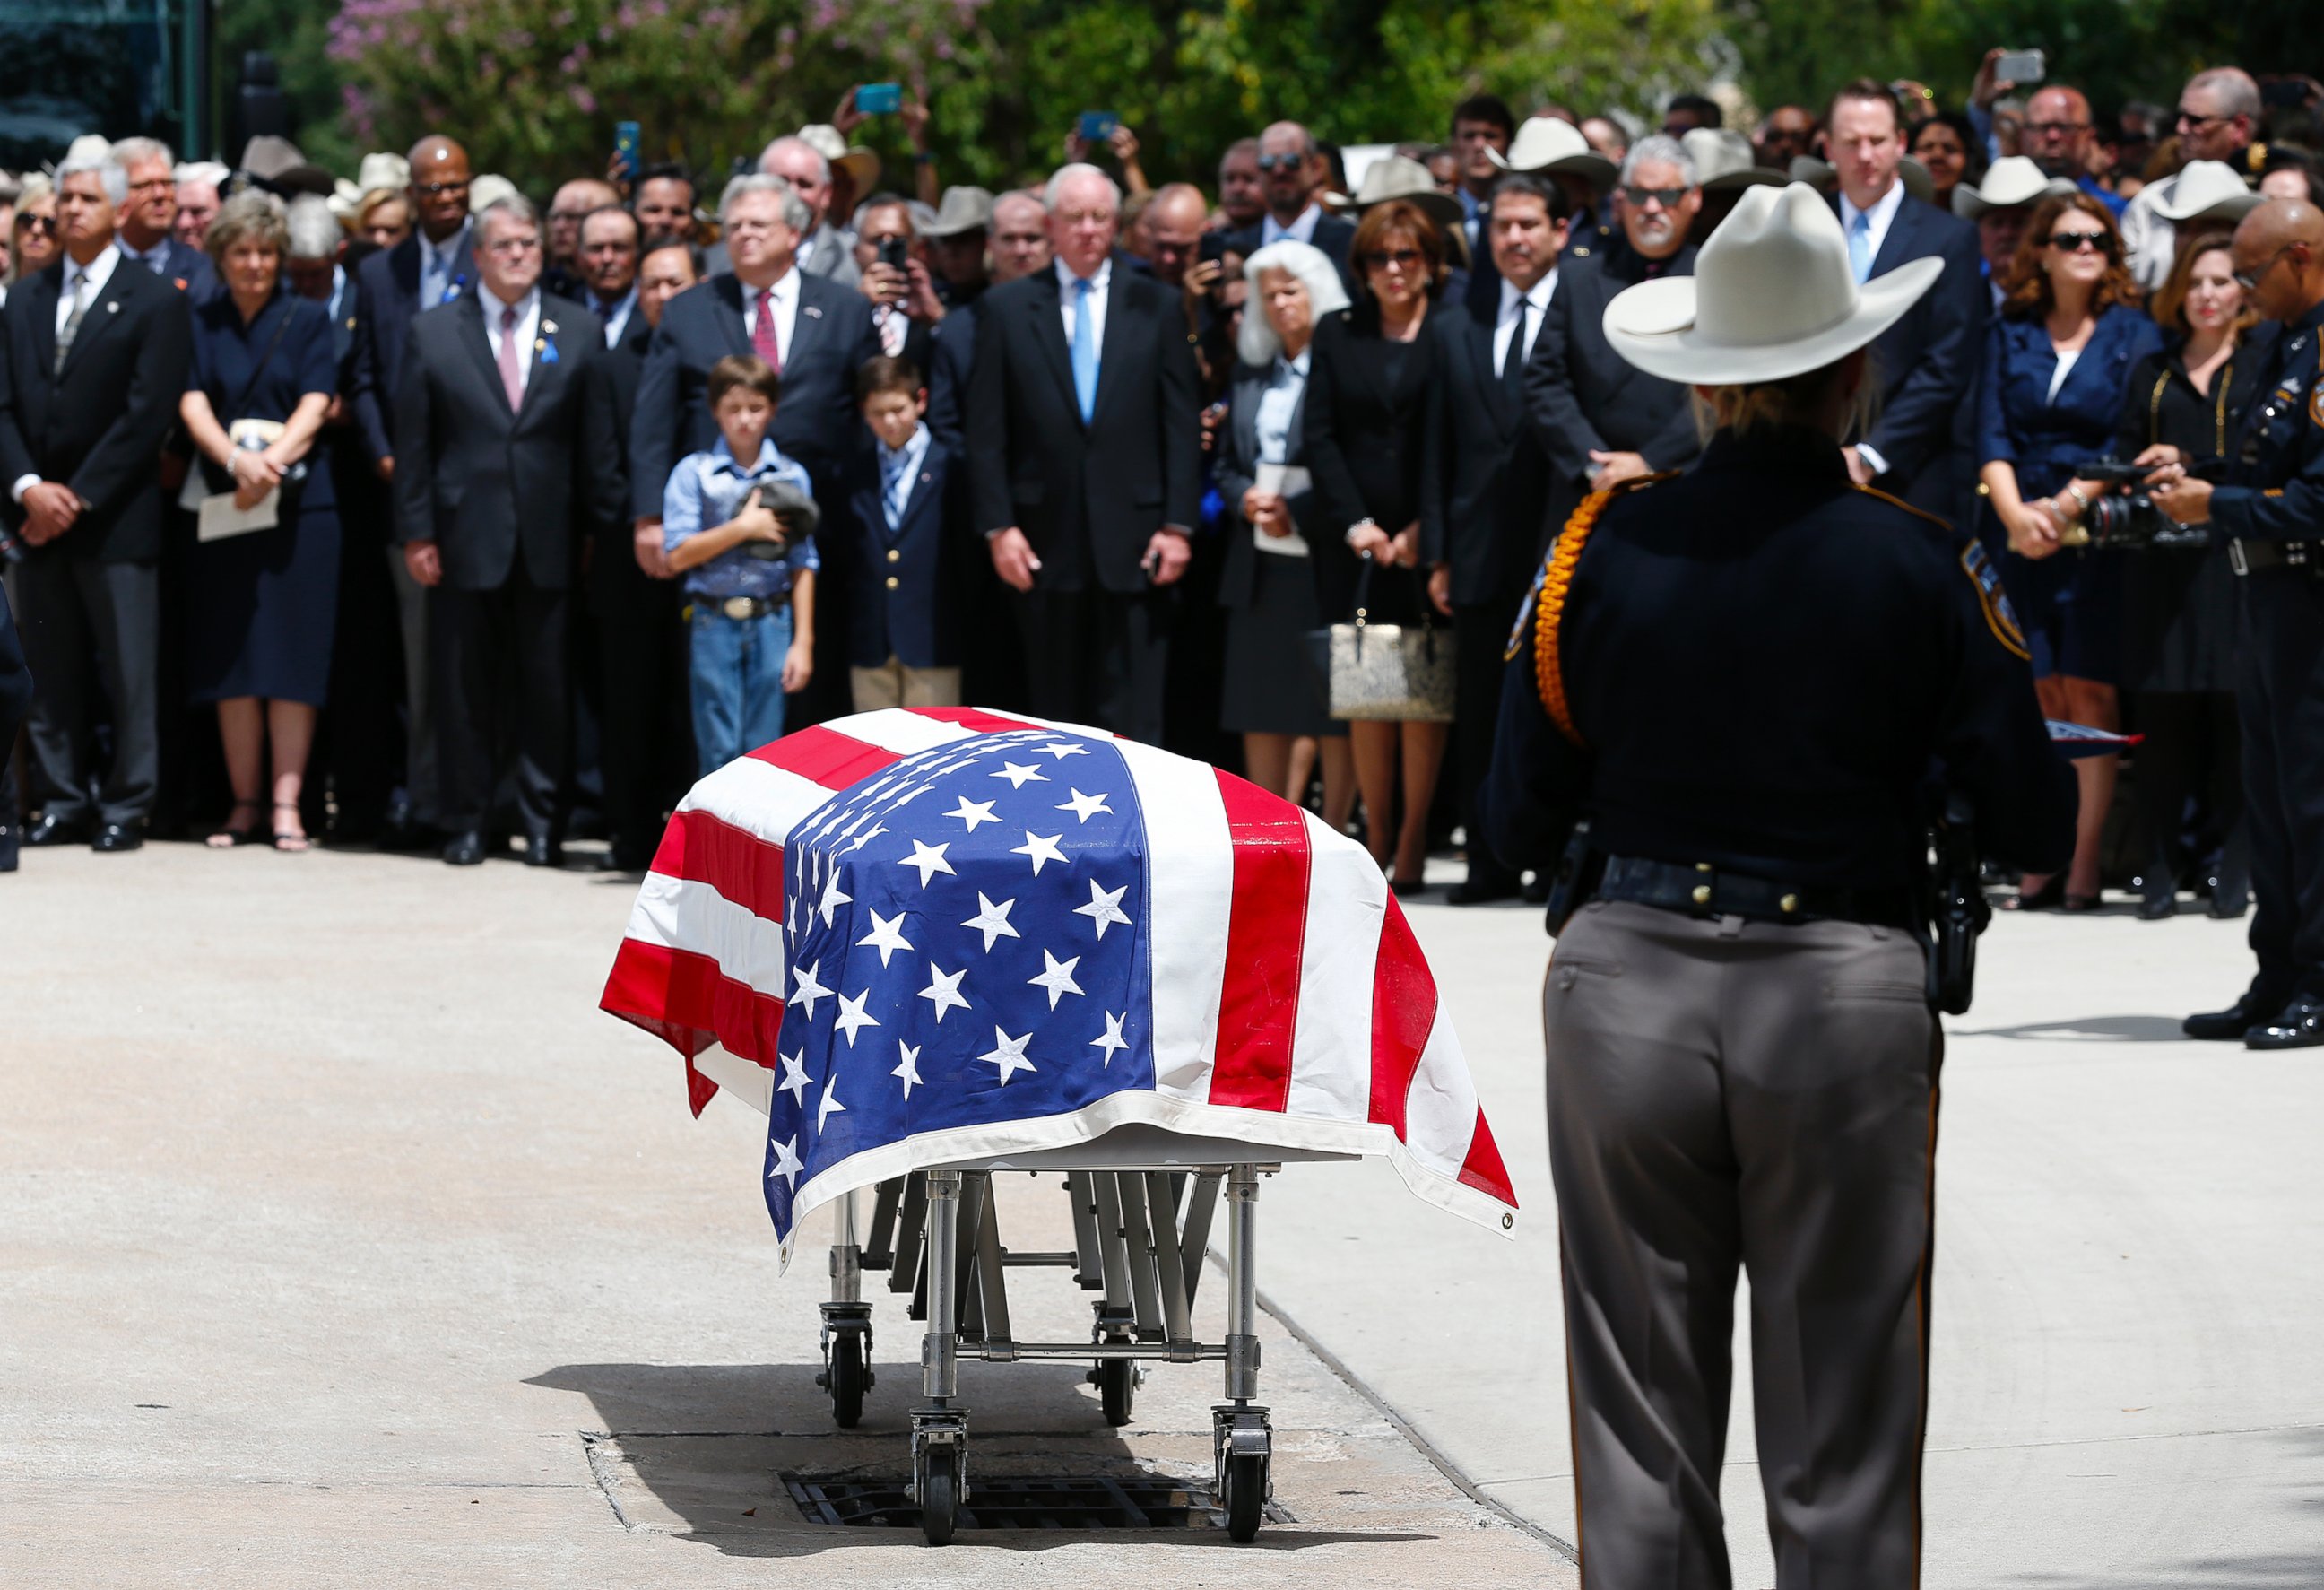 PHOTO: Harris County Sheriff's Deputy Darren Goforth's casket is seen following his funeral at Second Baptist Church on Sept. 4, 2015, in Houston, Texas.